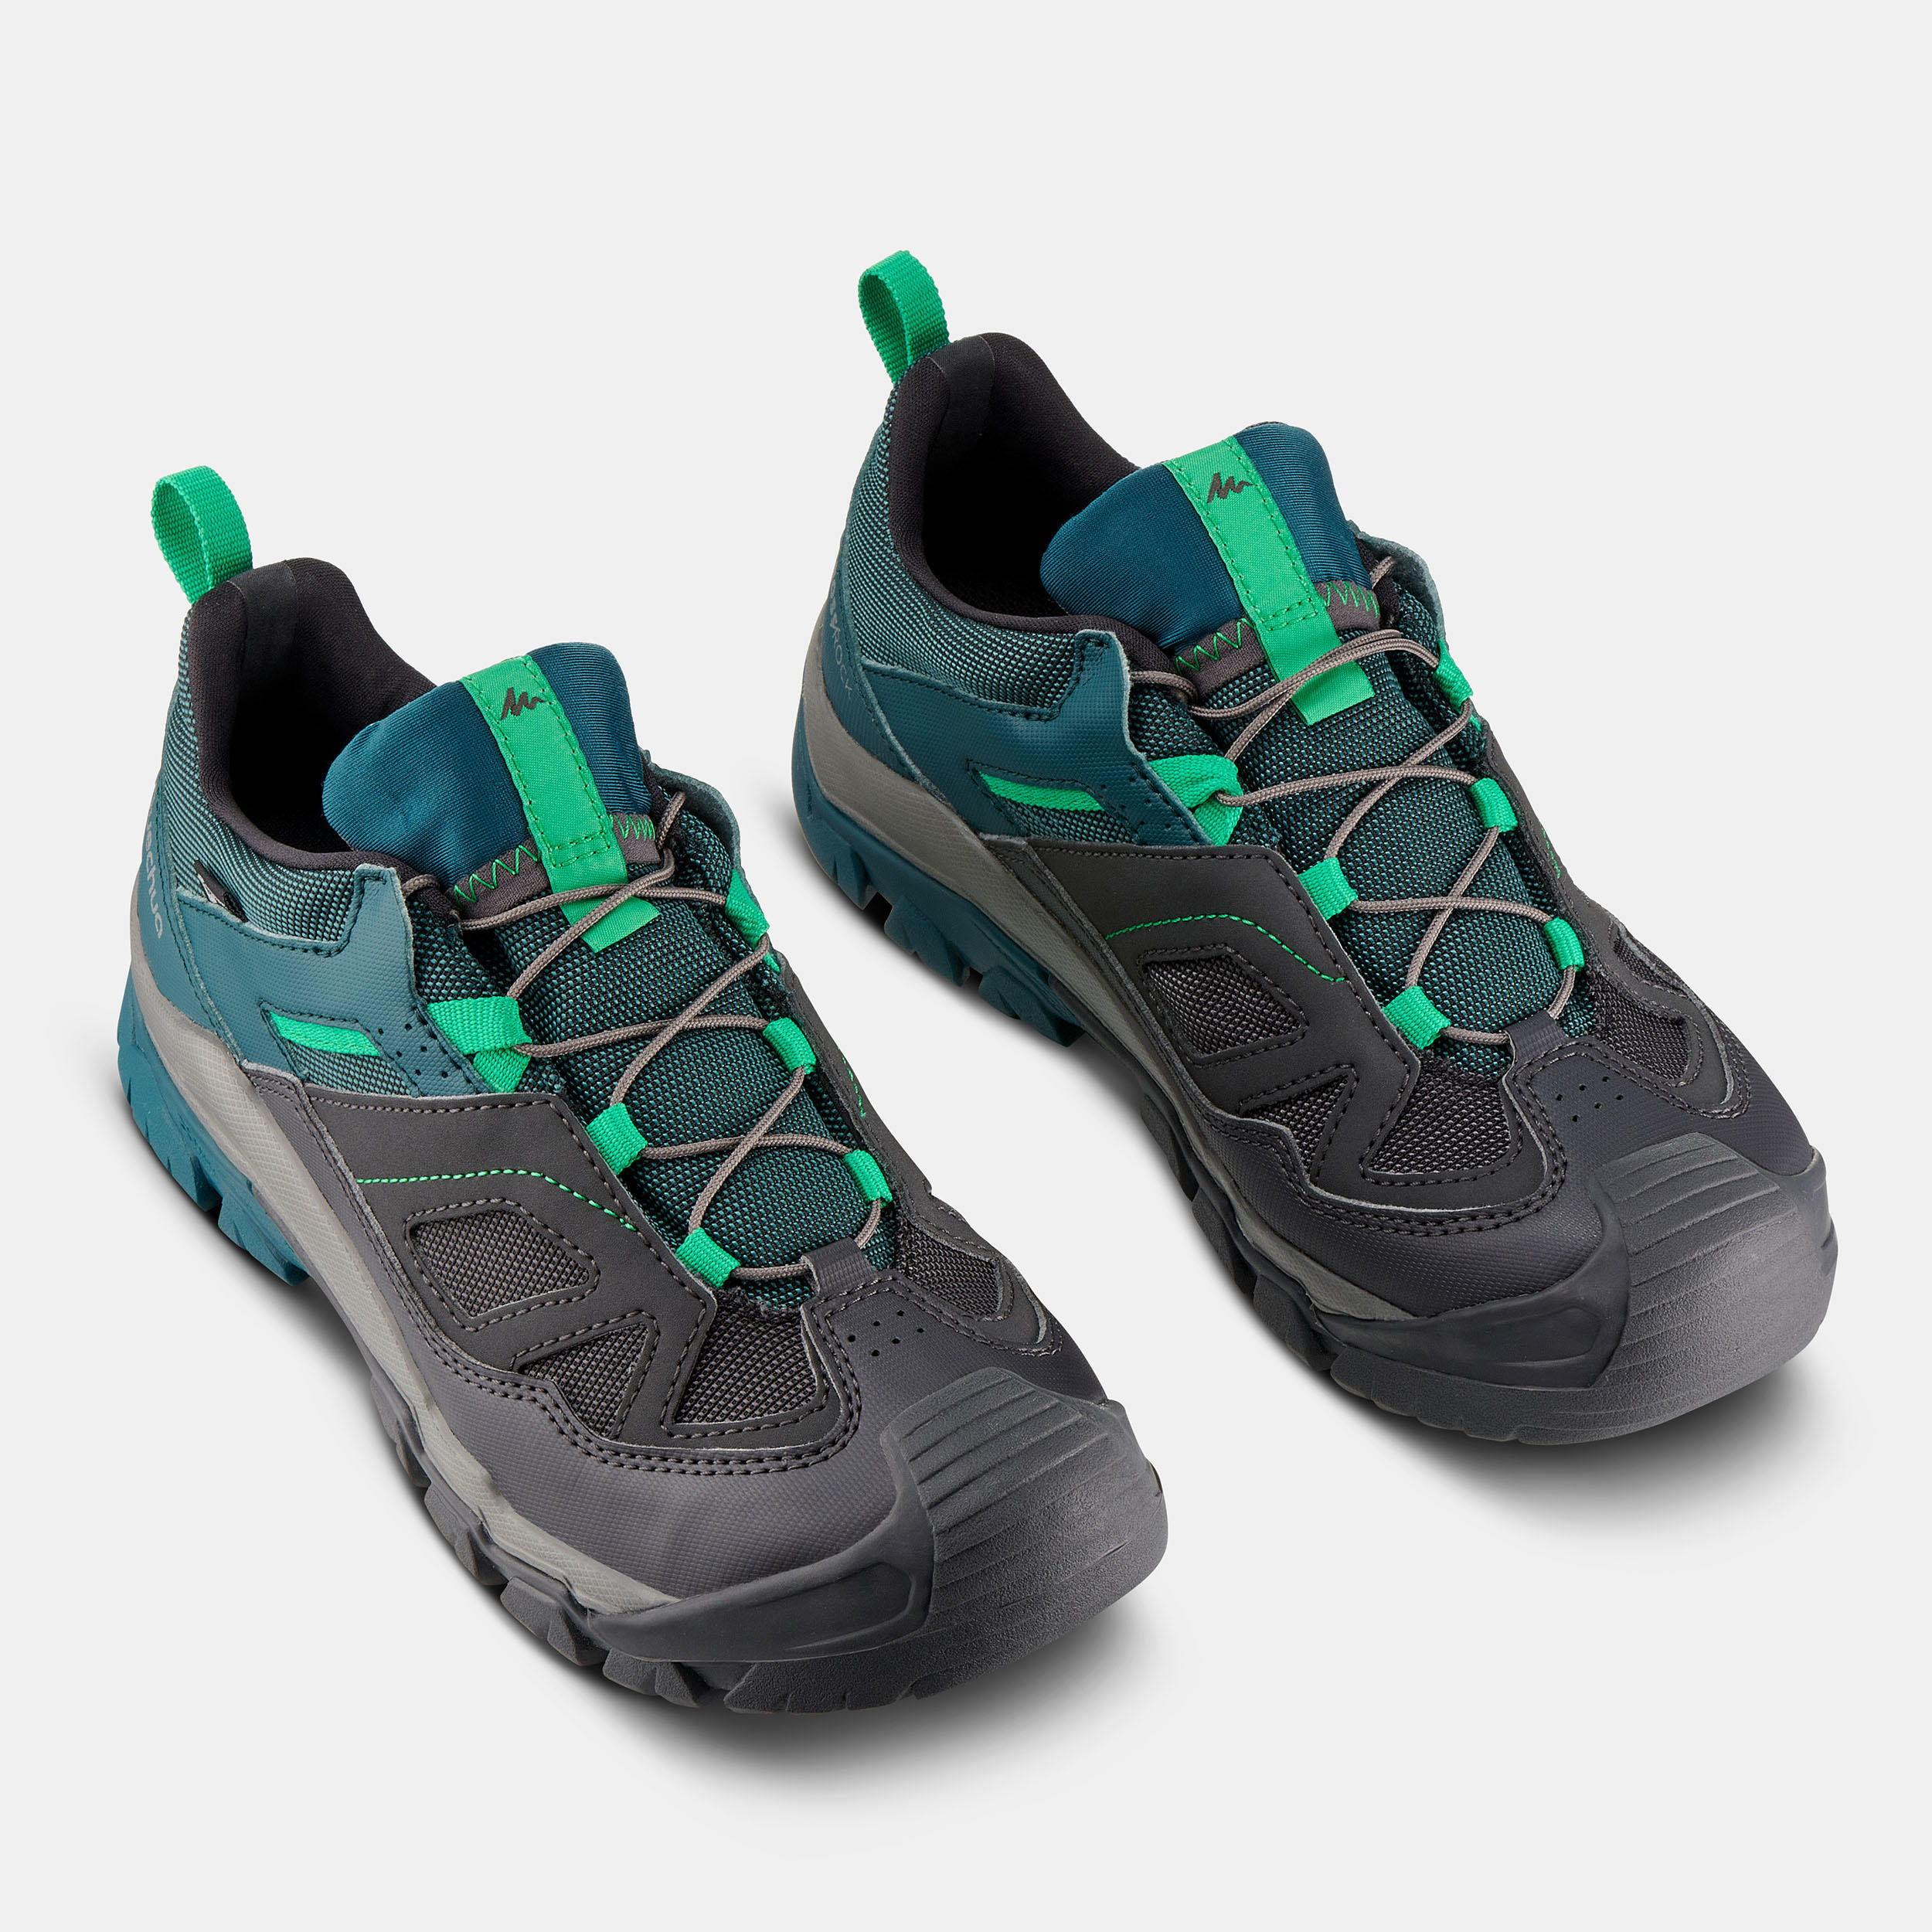 Kids’ Waterproof Lace-up Hiking Shoes - CROSSROCK Sizes 2-5 Green 4/5